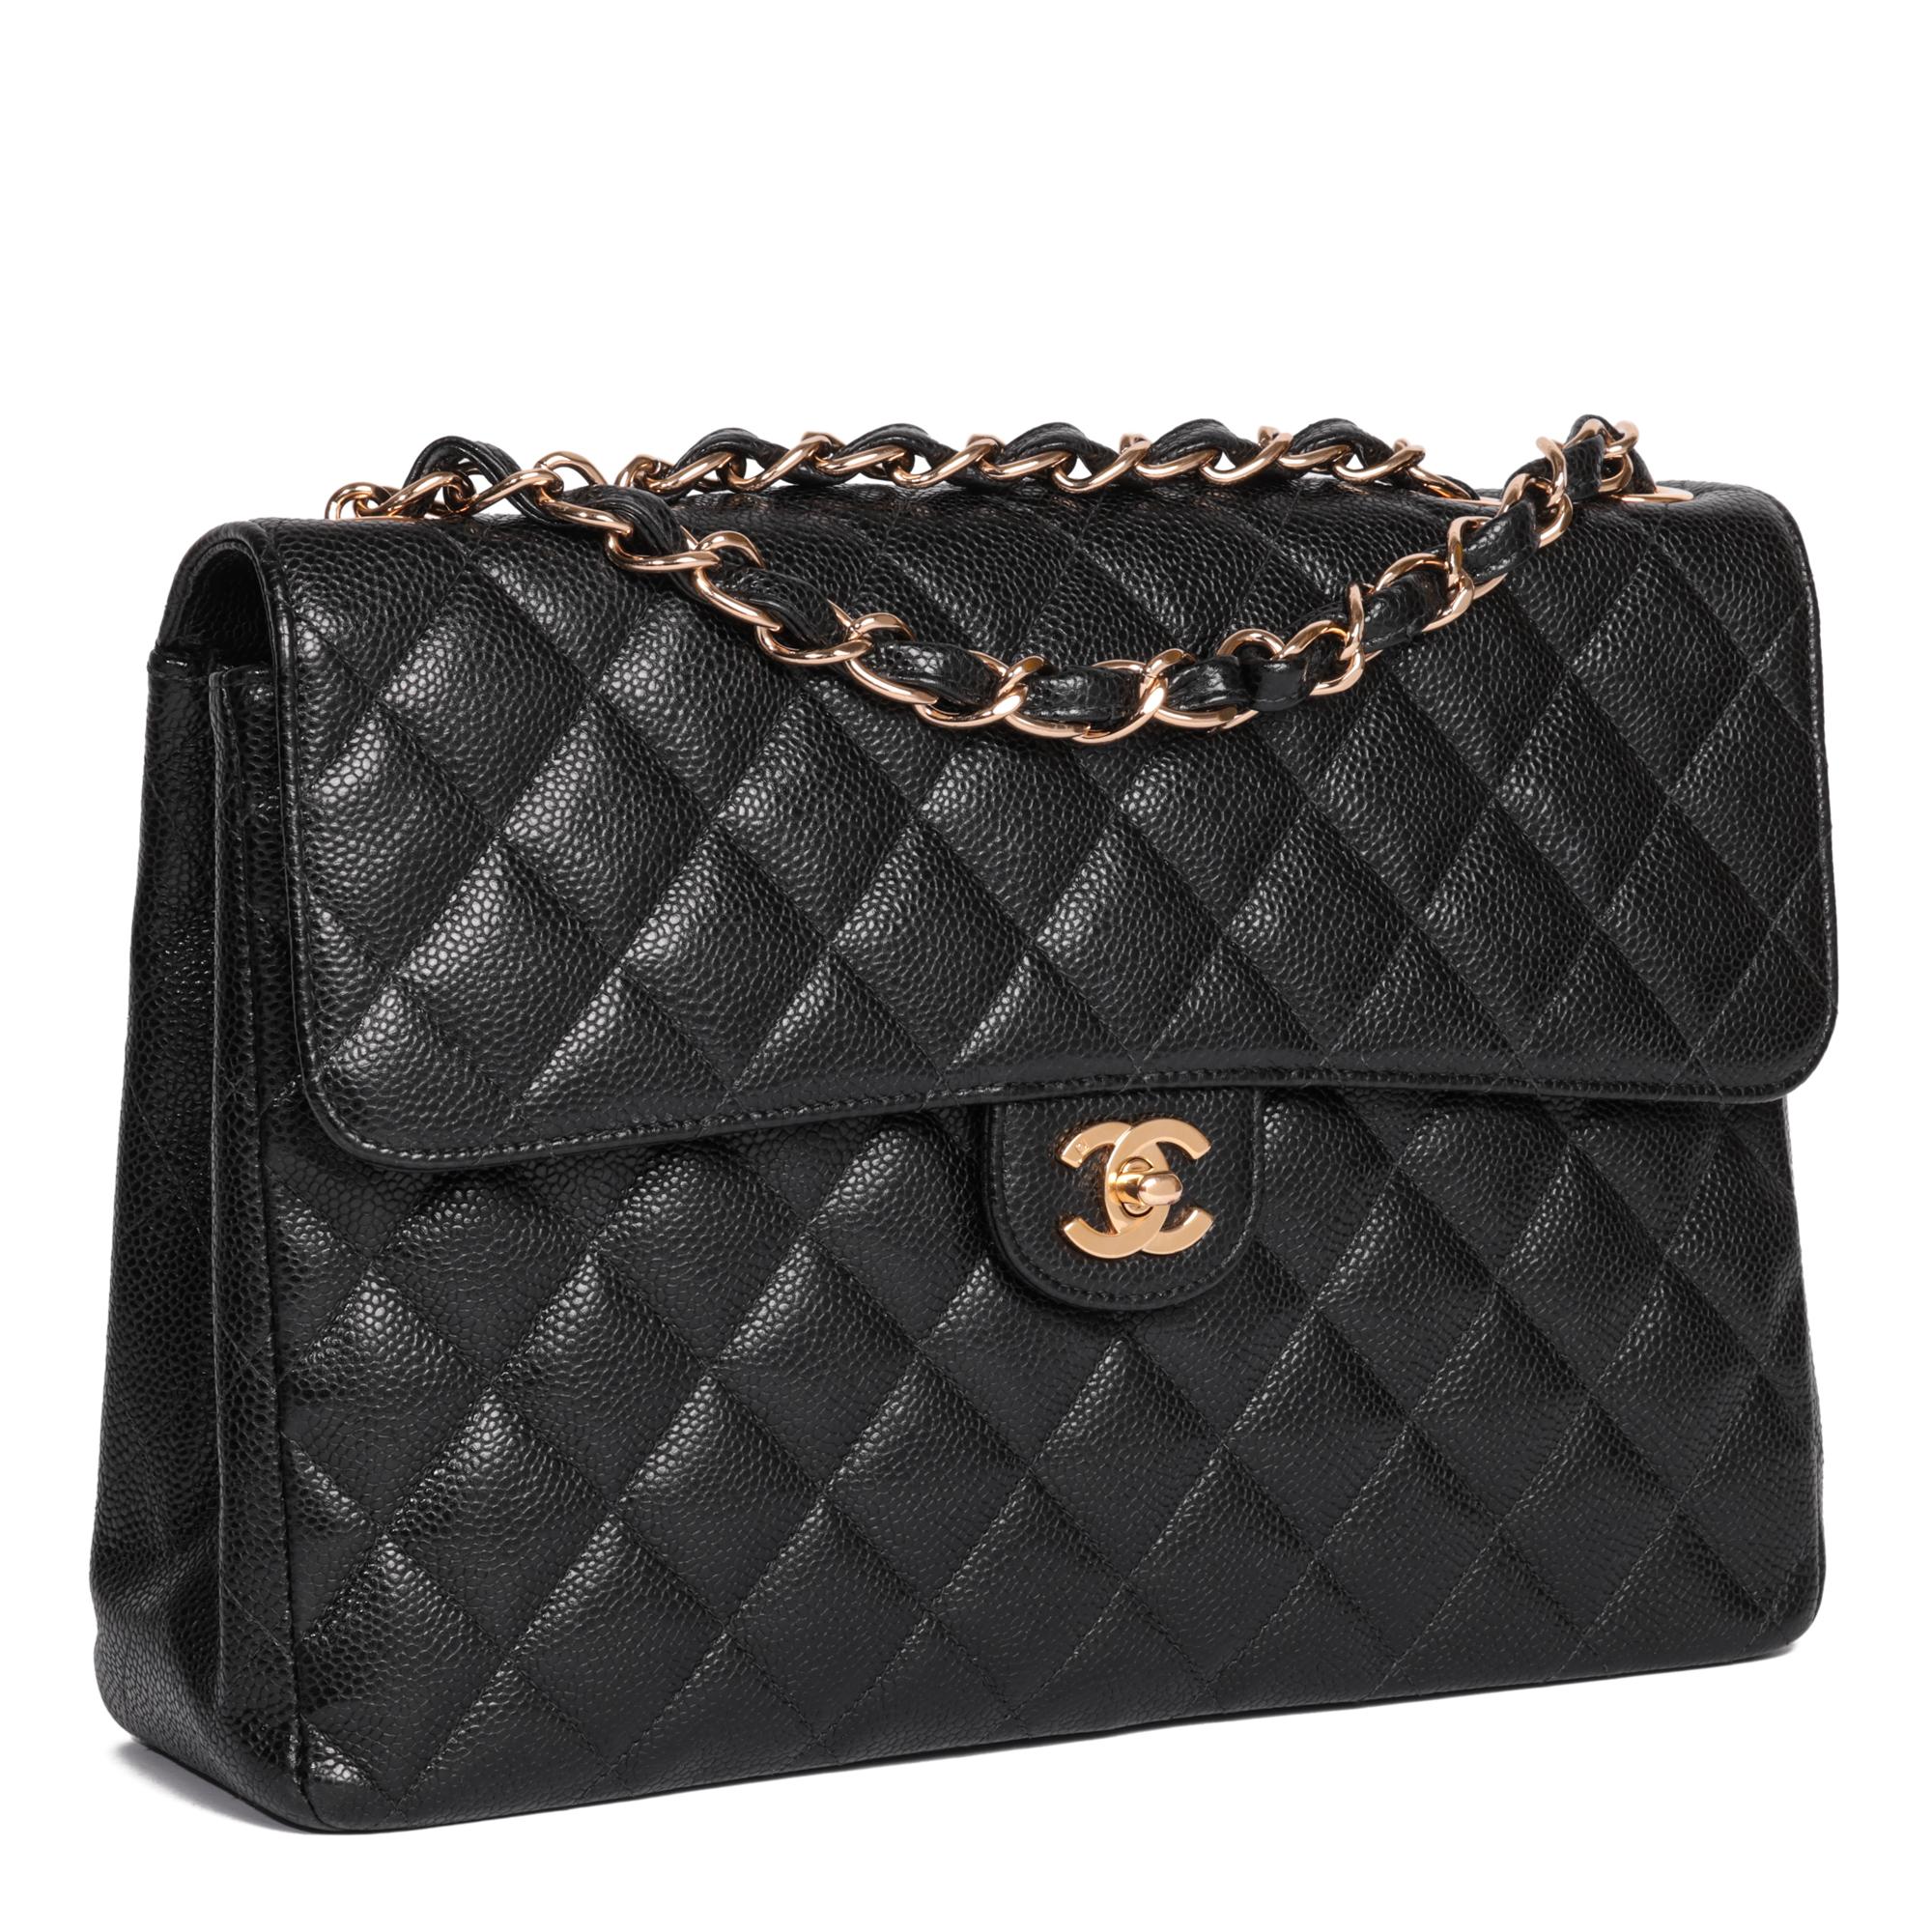 Chanel Black Quilted Caviar Leather Vintage Jumbo Classic Single Flap Bag

CONDITION NOTES
The exterior is in excellent condition with light signs of use.
The interior is in excellent condition with light signs of use.
The hardware is in excellent